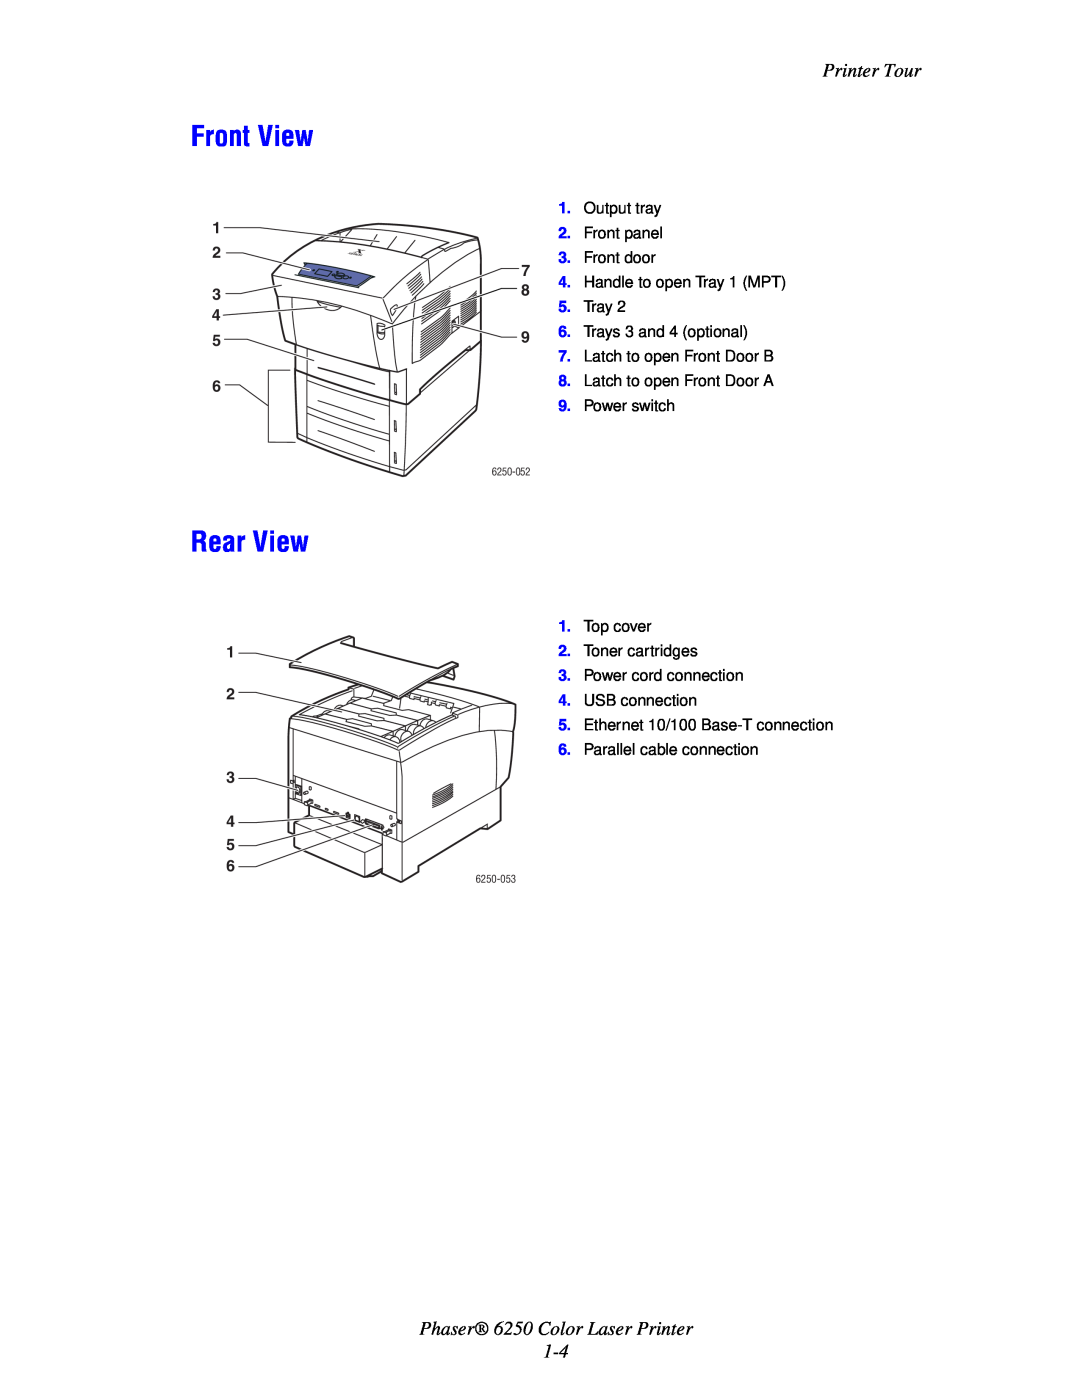 Xerox Front View, Rear View, Phaser 6250 Color Laser Printer 1-4, Printer Tour, Top cover, Toner cartridges, 6250-052 